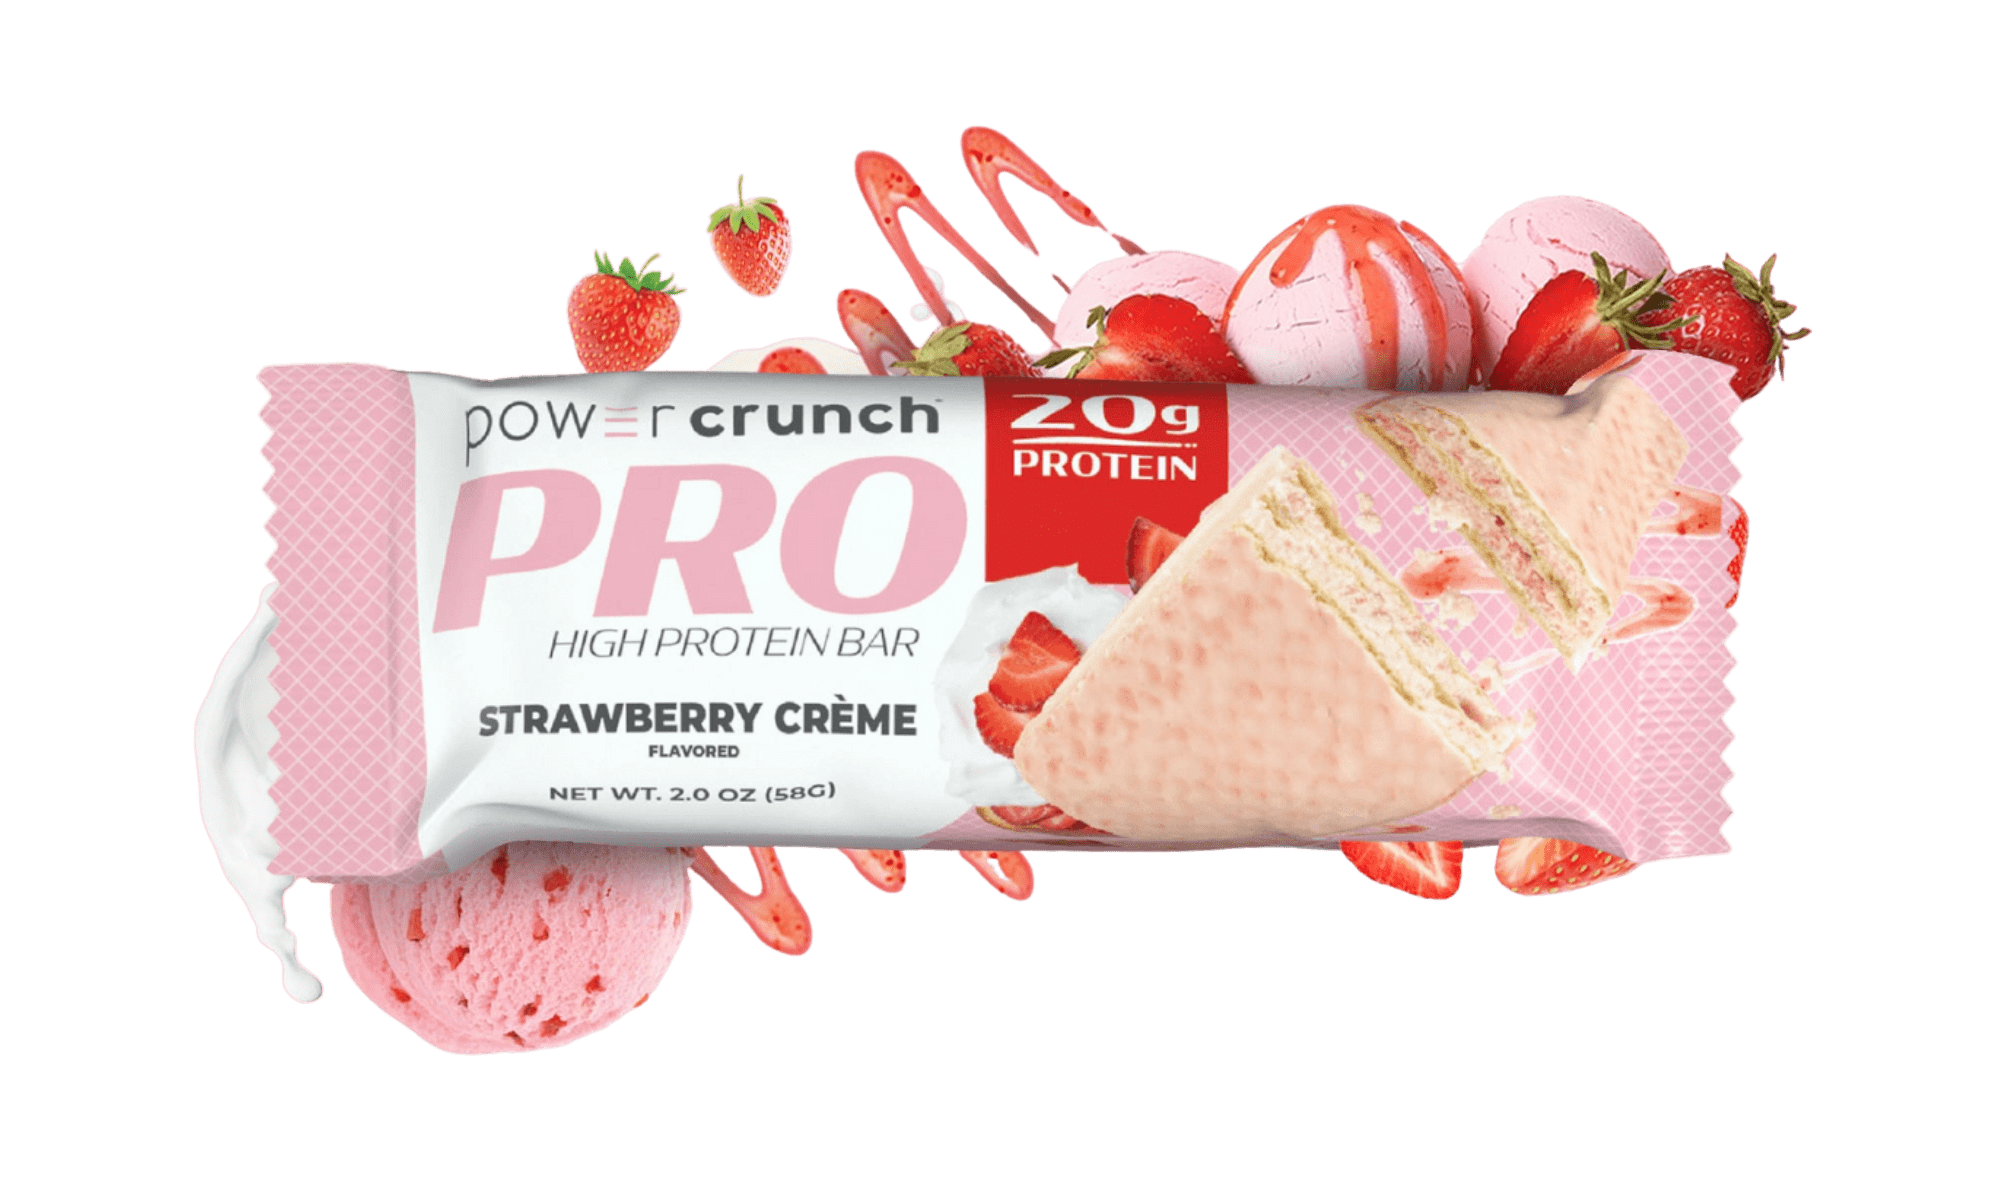 Power Crunch PRO Strawberry 20g protein bars pictured with Strawberry flavor explosion